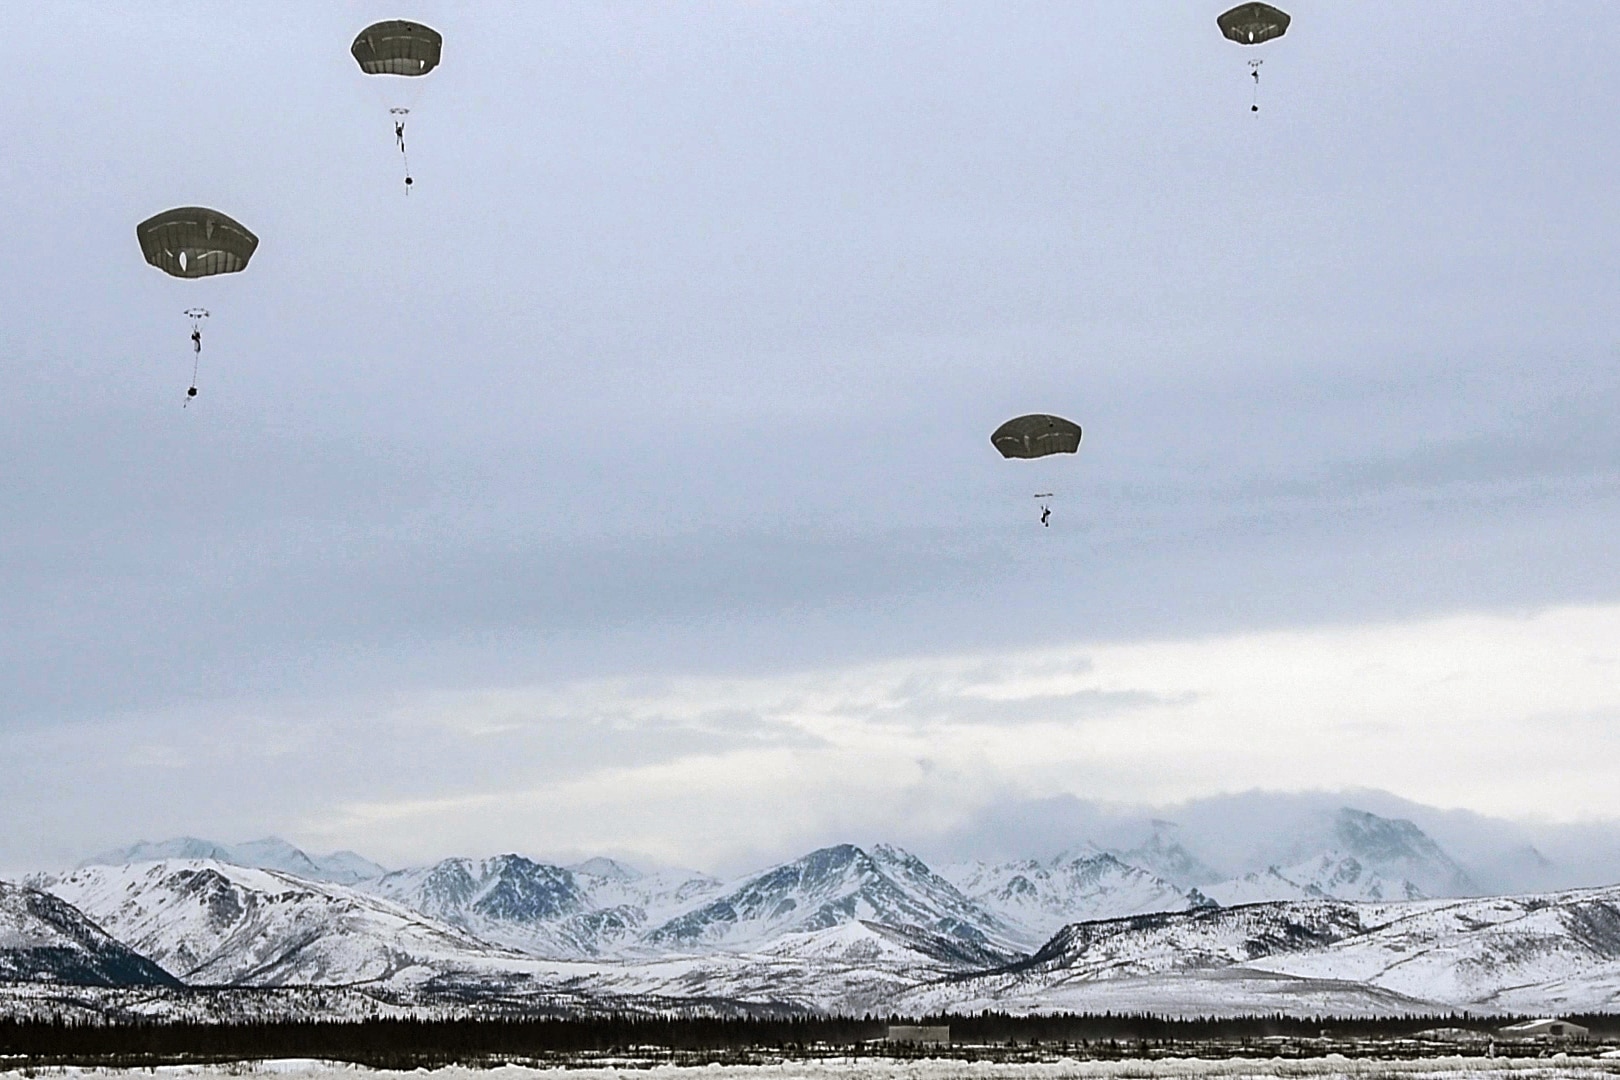 Parachutists drop down onto a snowy landscape with mountains in the background.